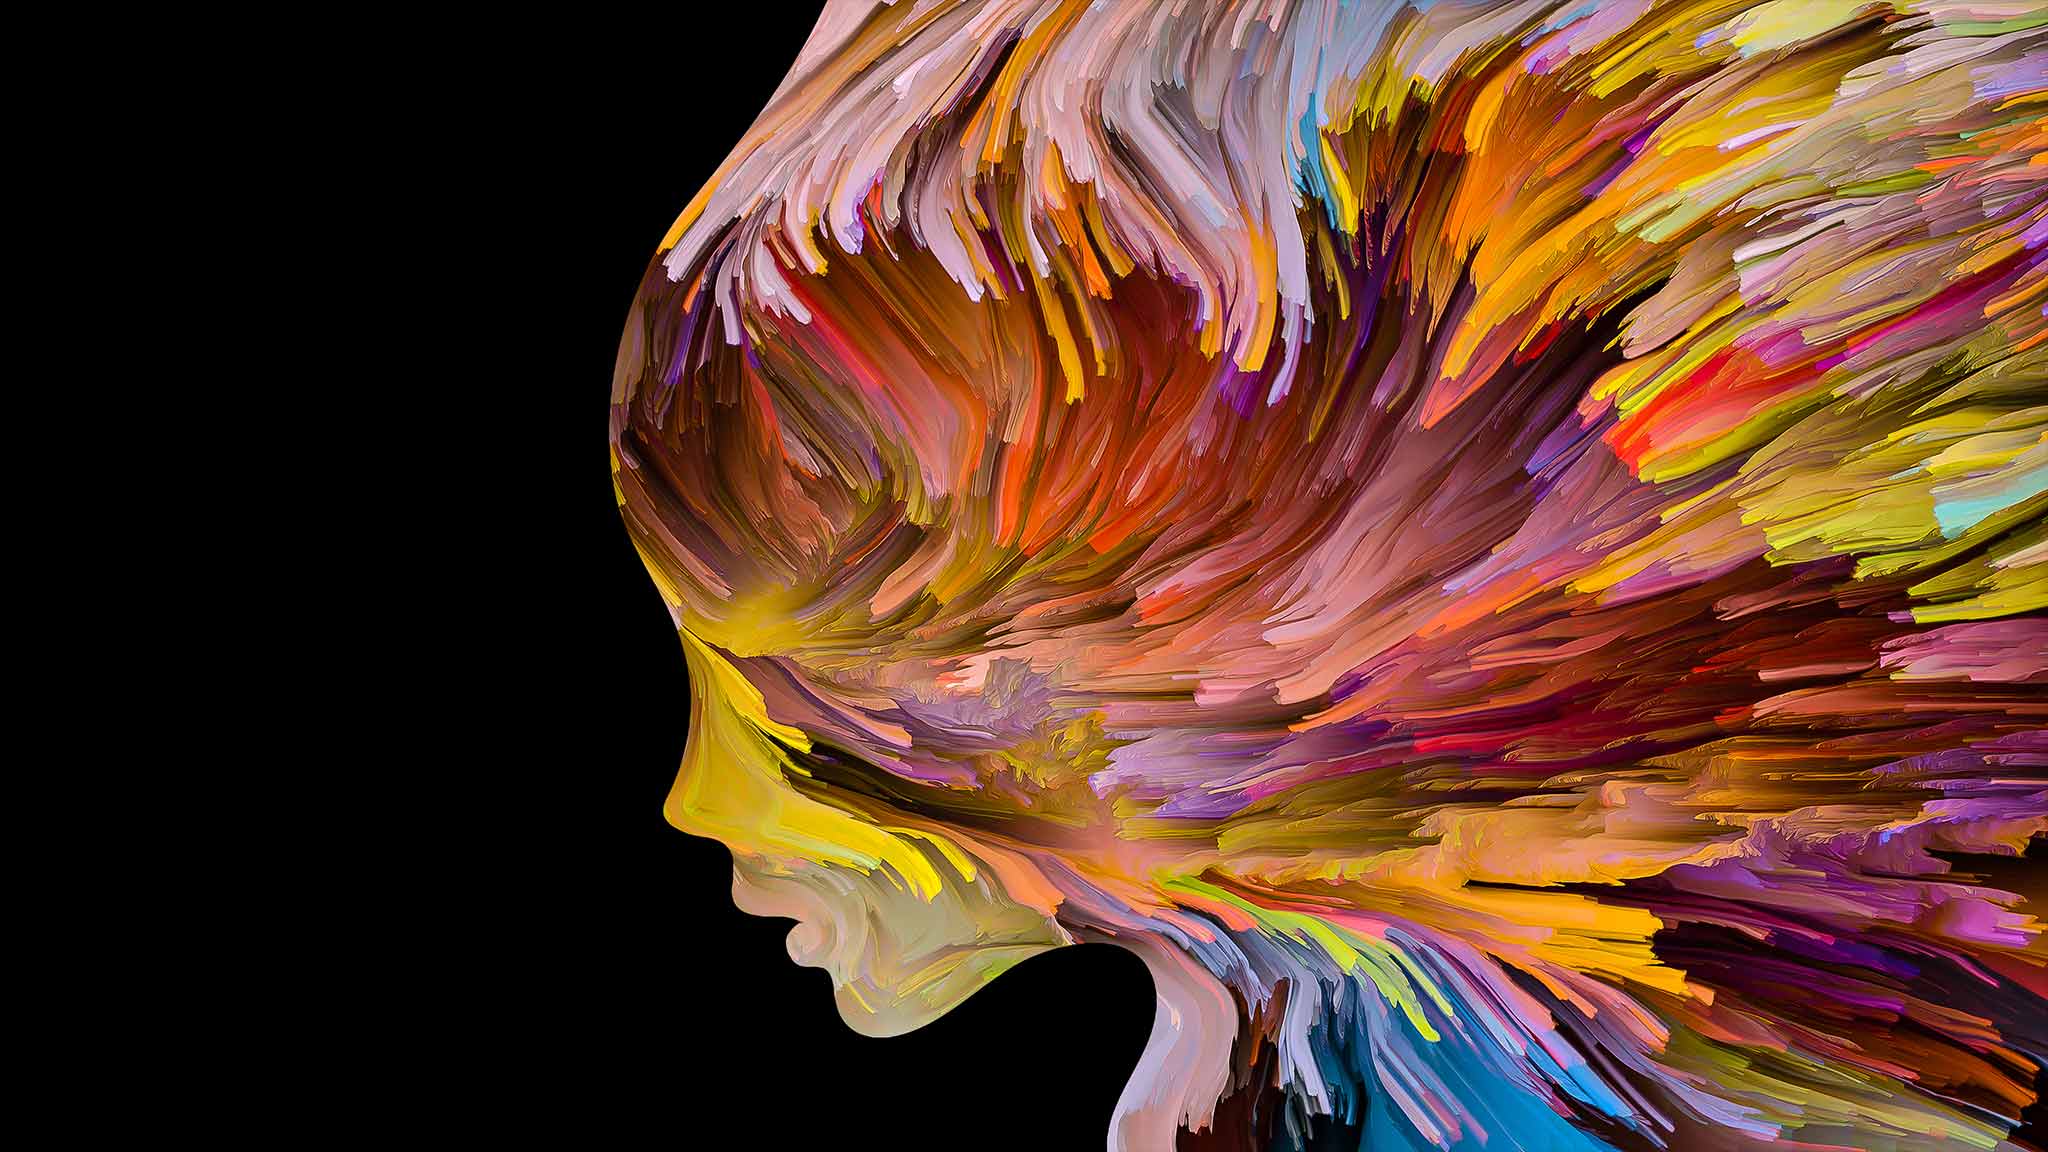 Abstract Silhouette Of Woman's Face Depicted Through Colorful Paint Strokes In Motion To Convey Inner Reflection And Turmoil